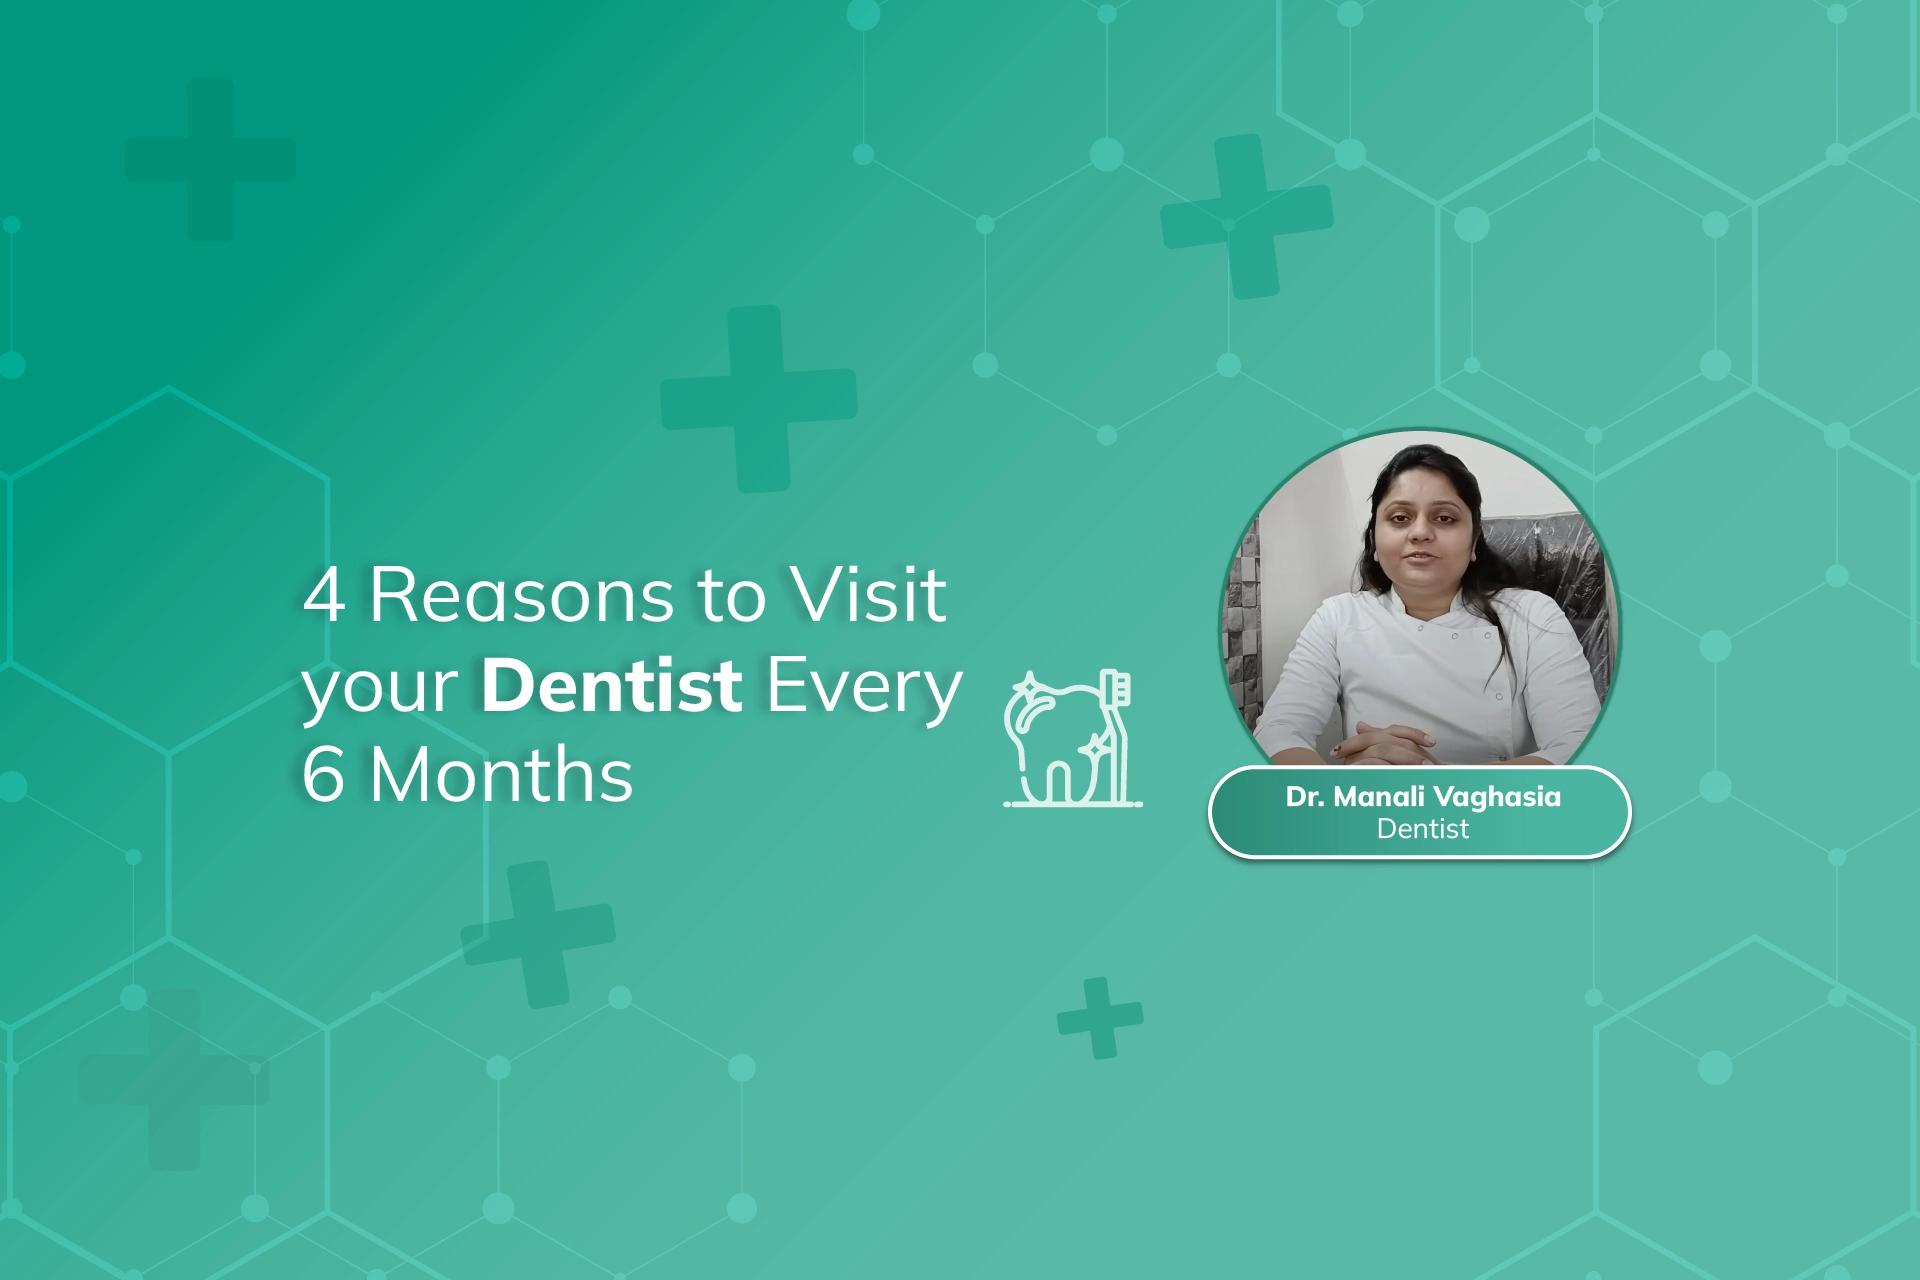 4 Reasons to Visit your Dentist Every 6 Months by Dr. Manali Vaghasia